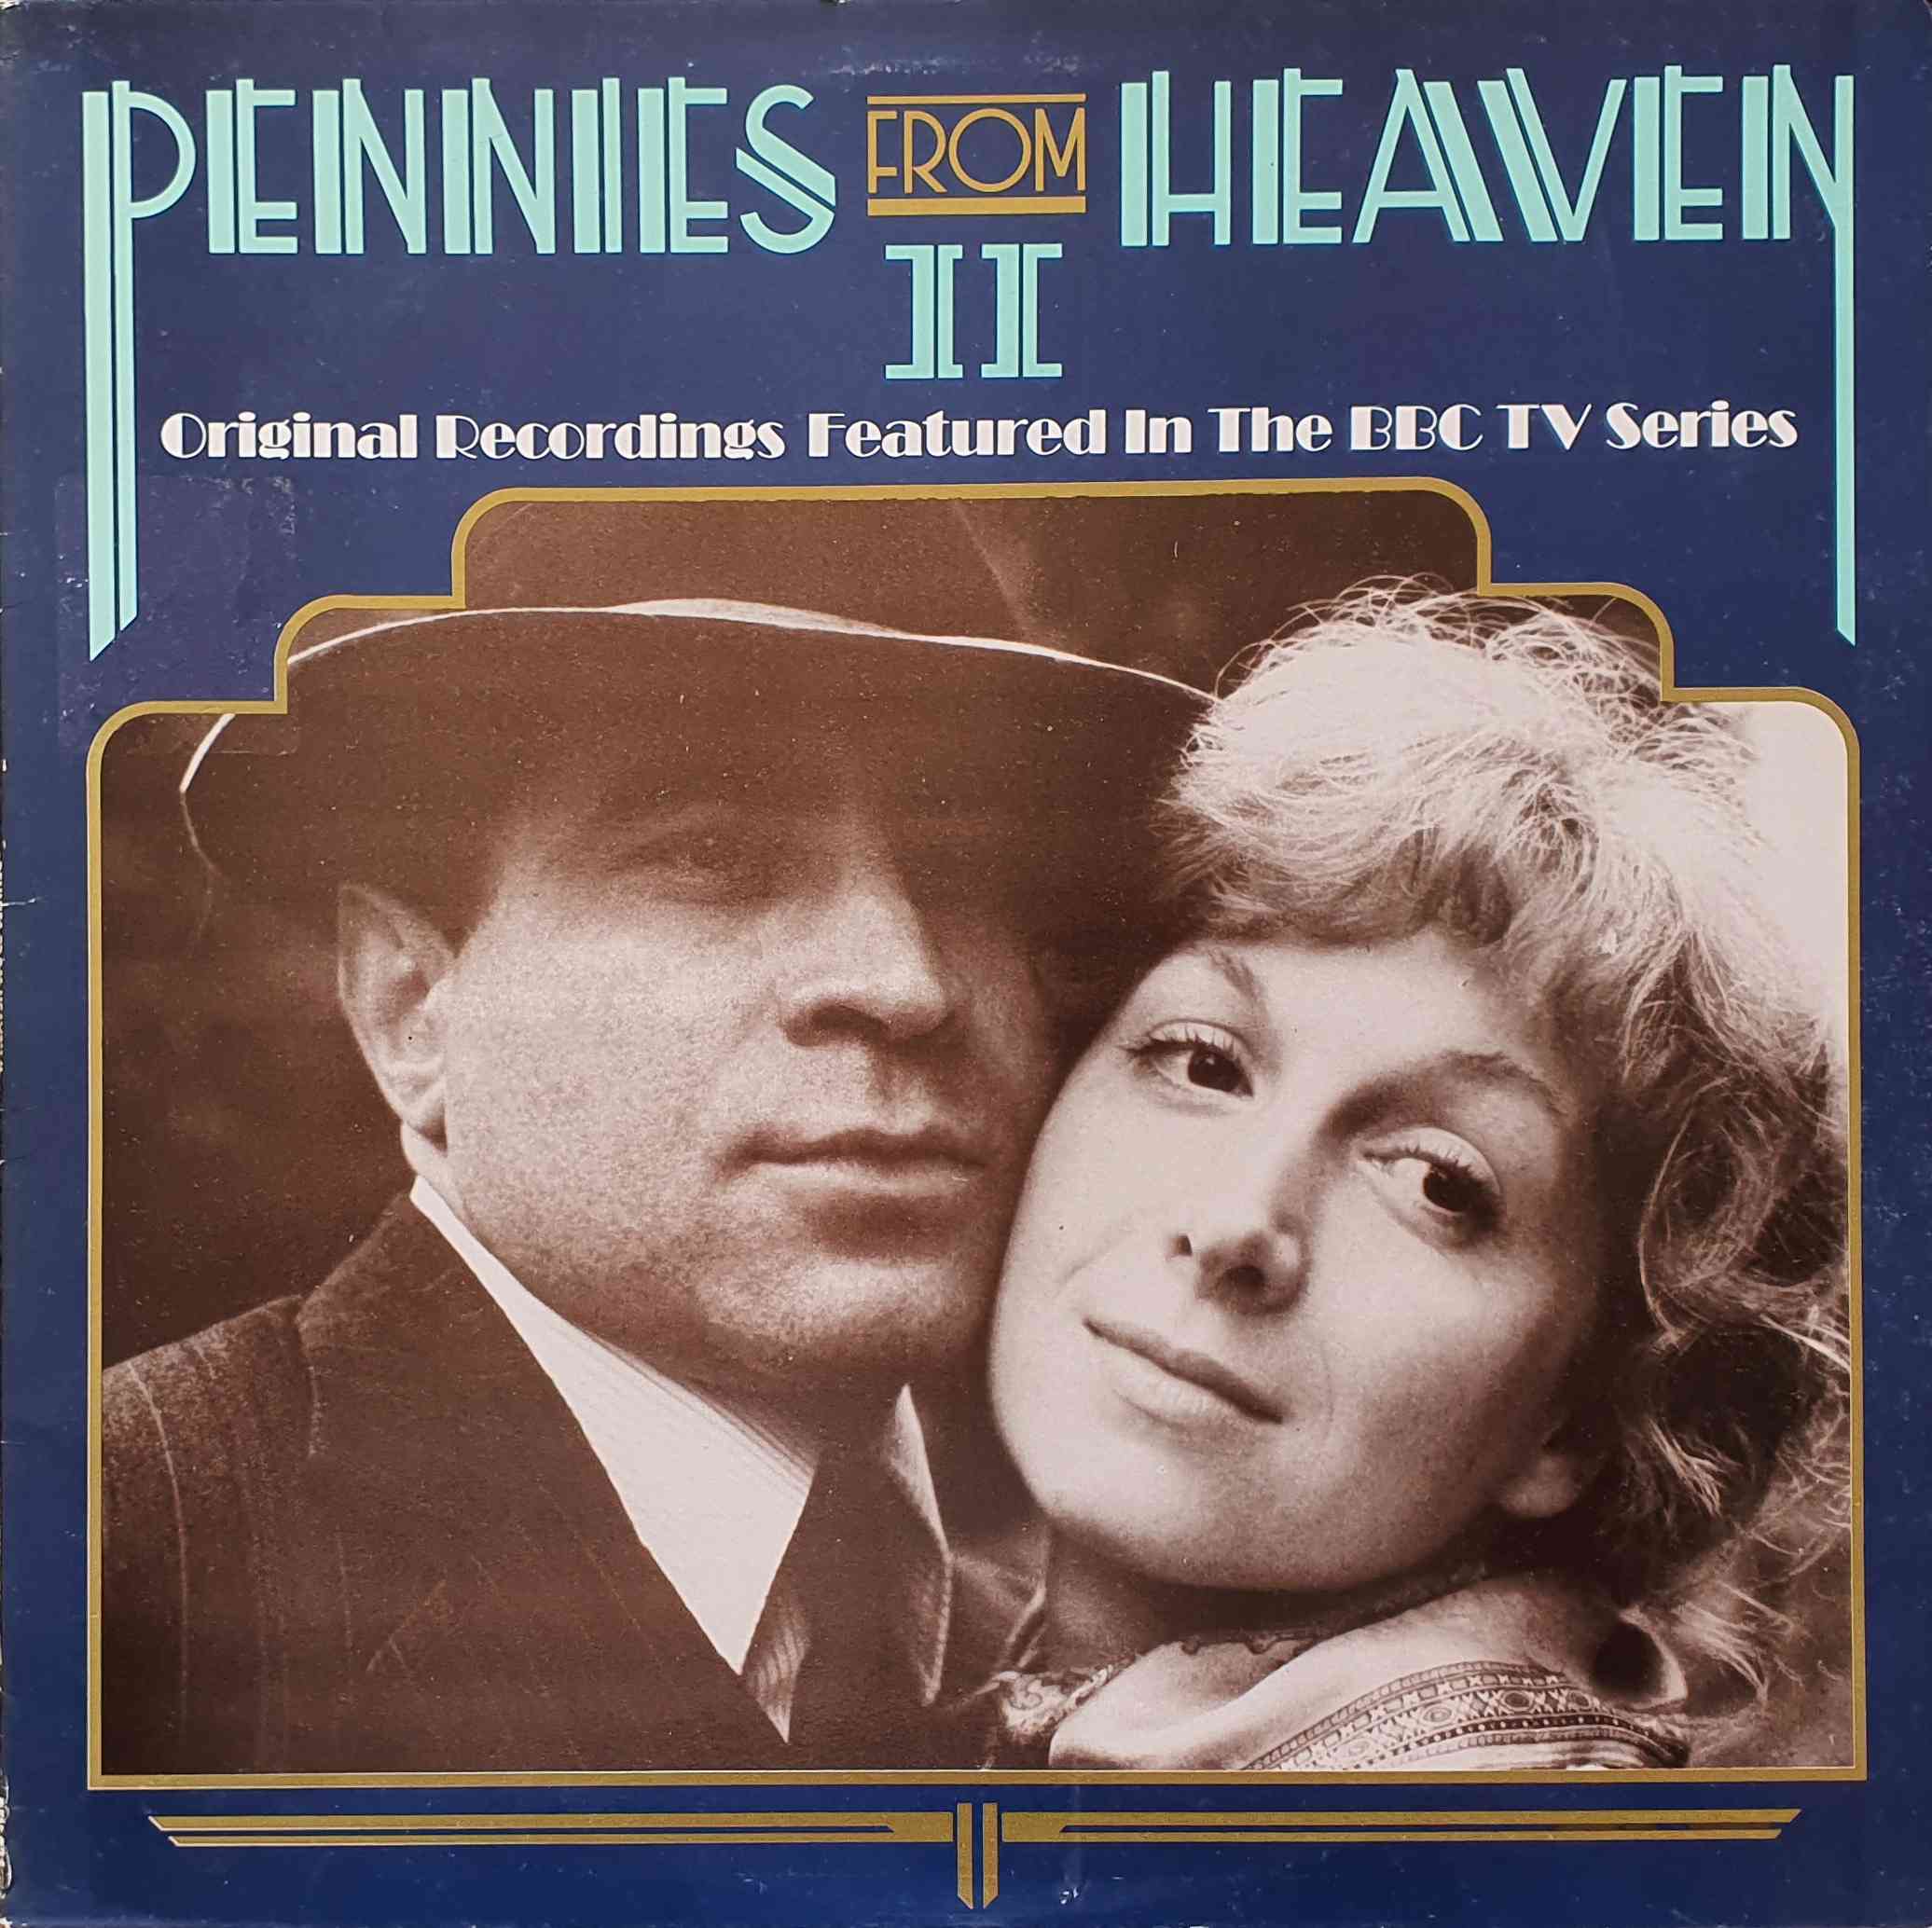 Picture of REN 824 Pennies from Heaven II by artist Various from the BBC albums - Records and Tapes library